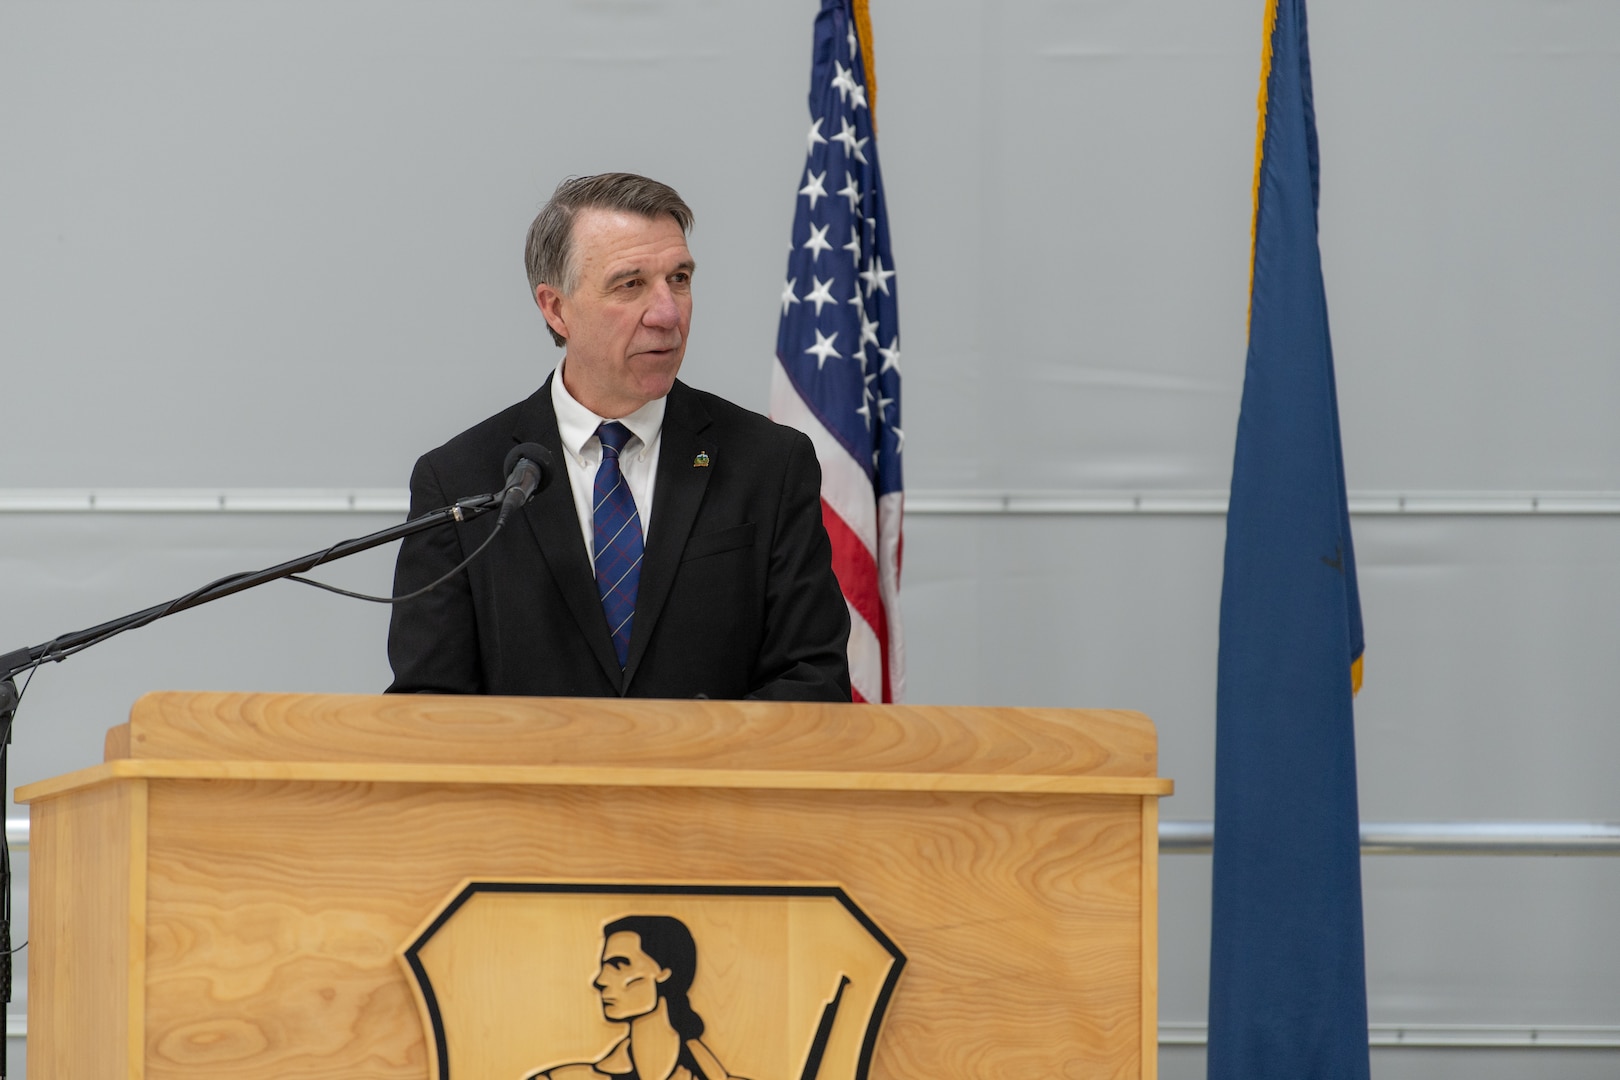 Vermont Governor Phil Scott addresses members of the 158th Fighter Wing and their families during a deployment ceremony at the Vermont Air National Guard Base, South Burlington, Vermont, Thursday, April 28th, 2022. The ceremony recognizes the sacrifices of Airmen and their families ahead of the 158th fighter wing’s deployment to Europe. (U.S. Air Force photo by Tech. Sgt. Richard Mekkri)